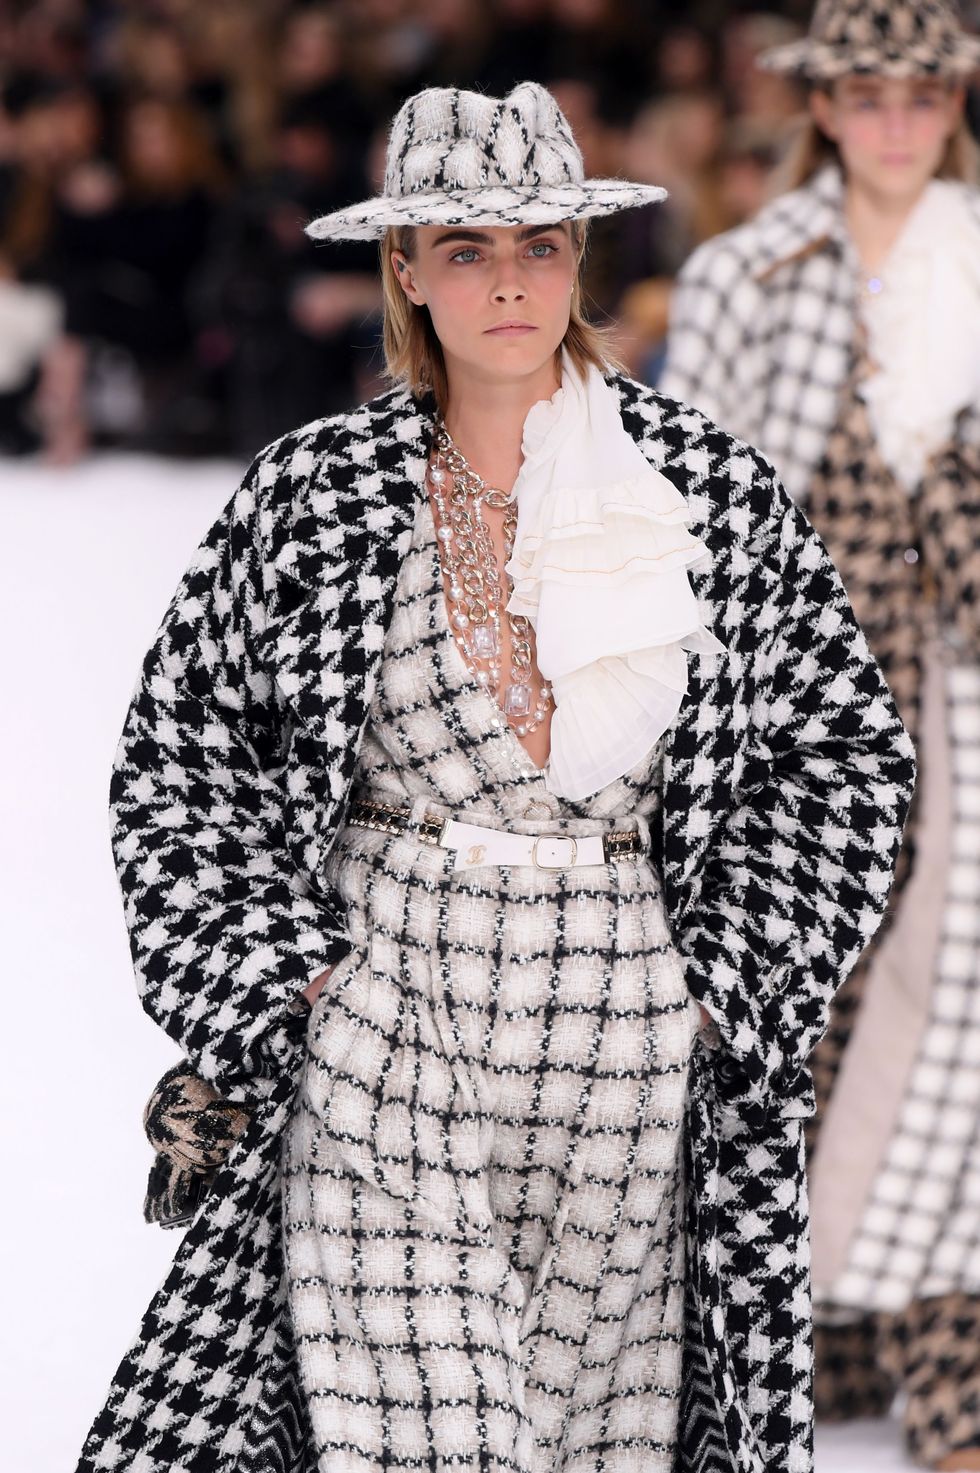 Karl Lagerfeld's Final Chanel Show Saw Models Cry During The Finale